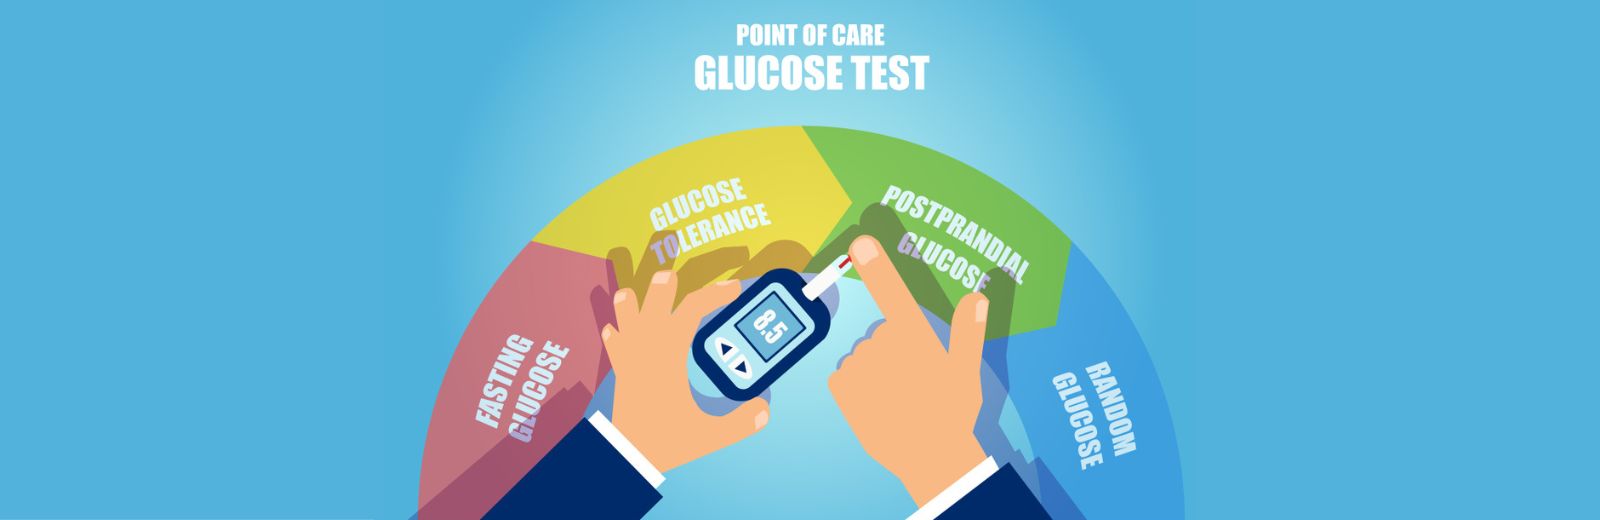 point of care testing for diabetes